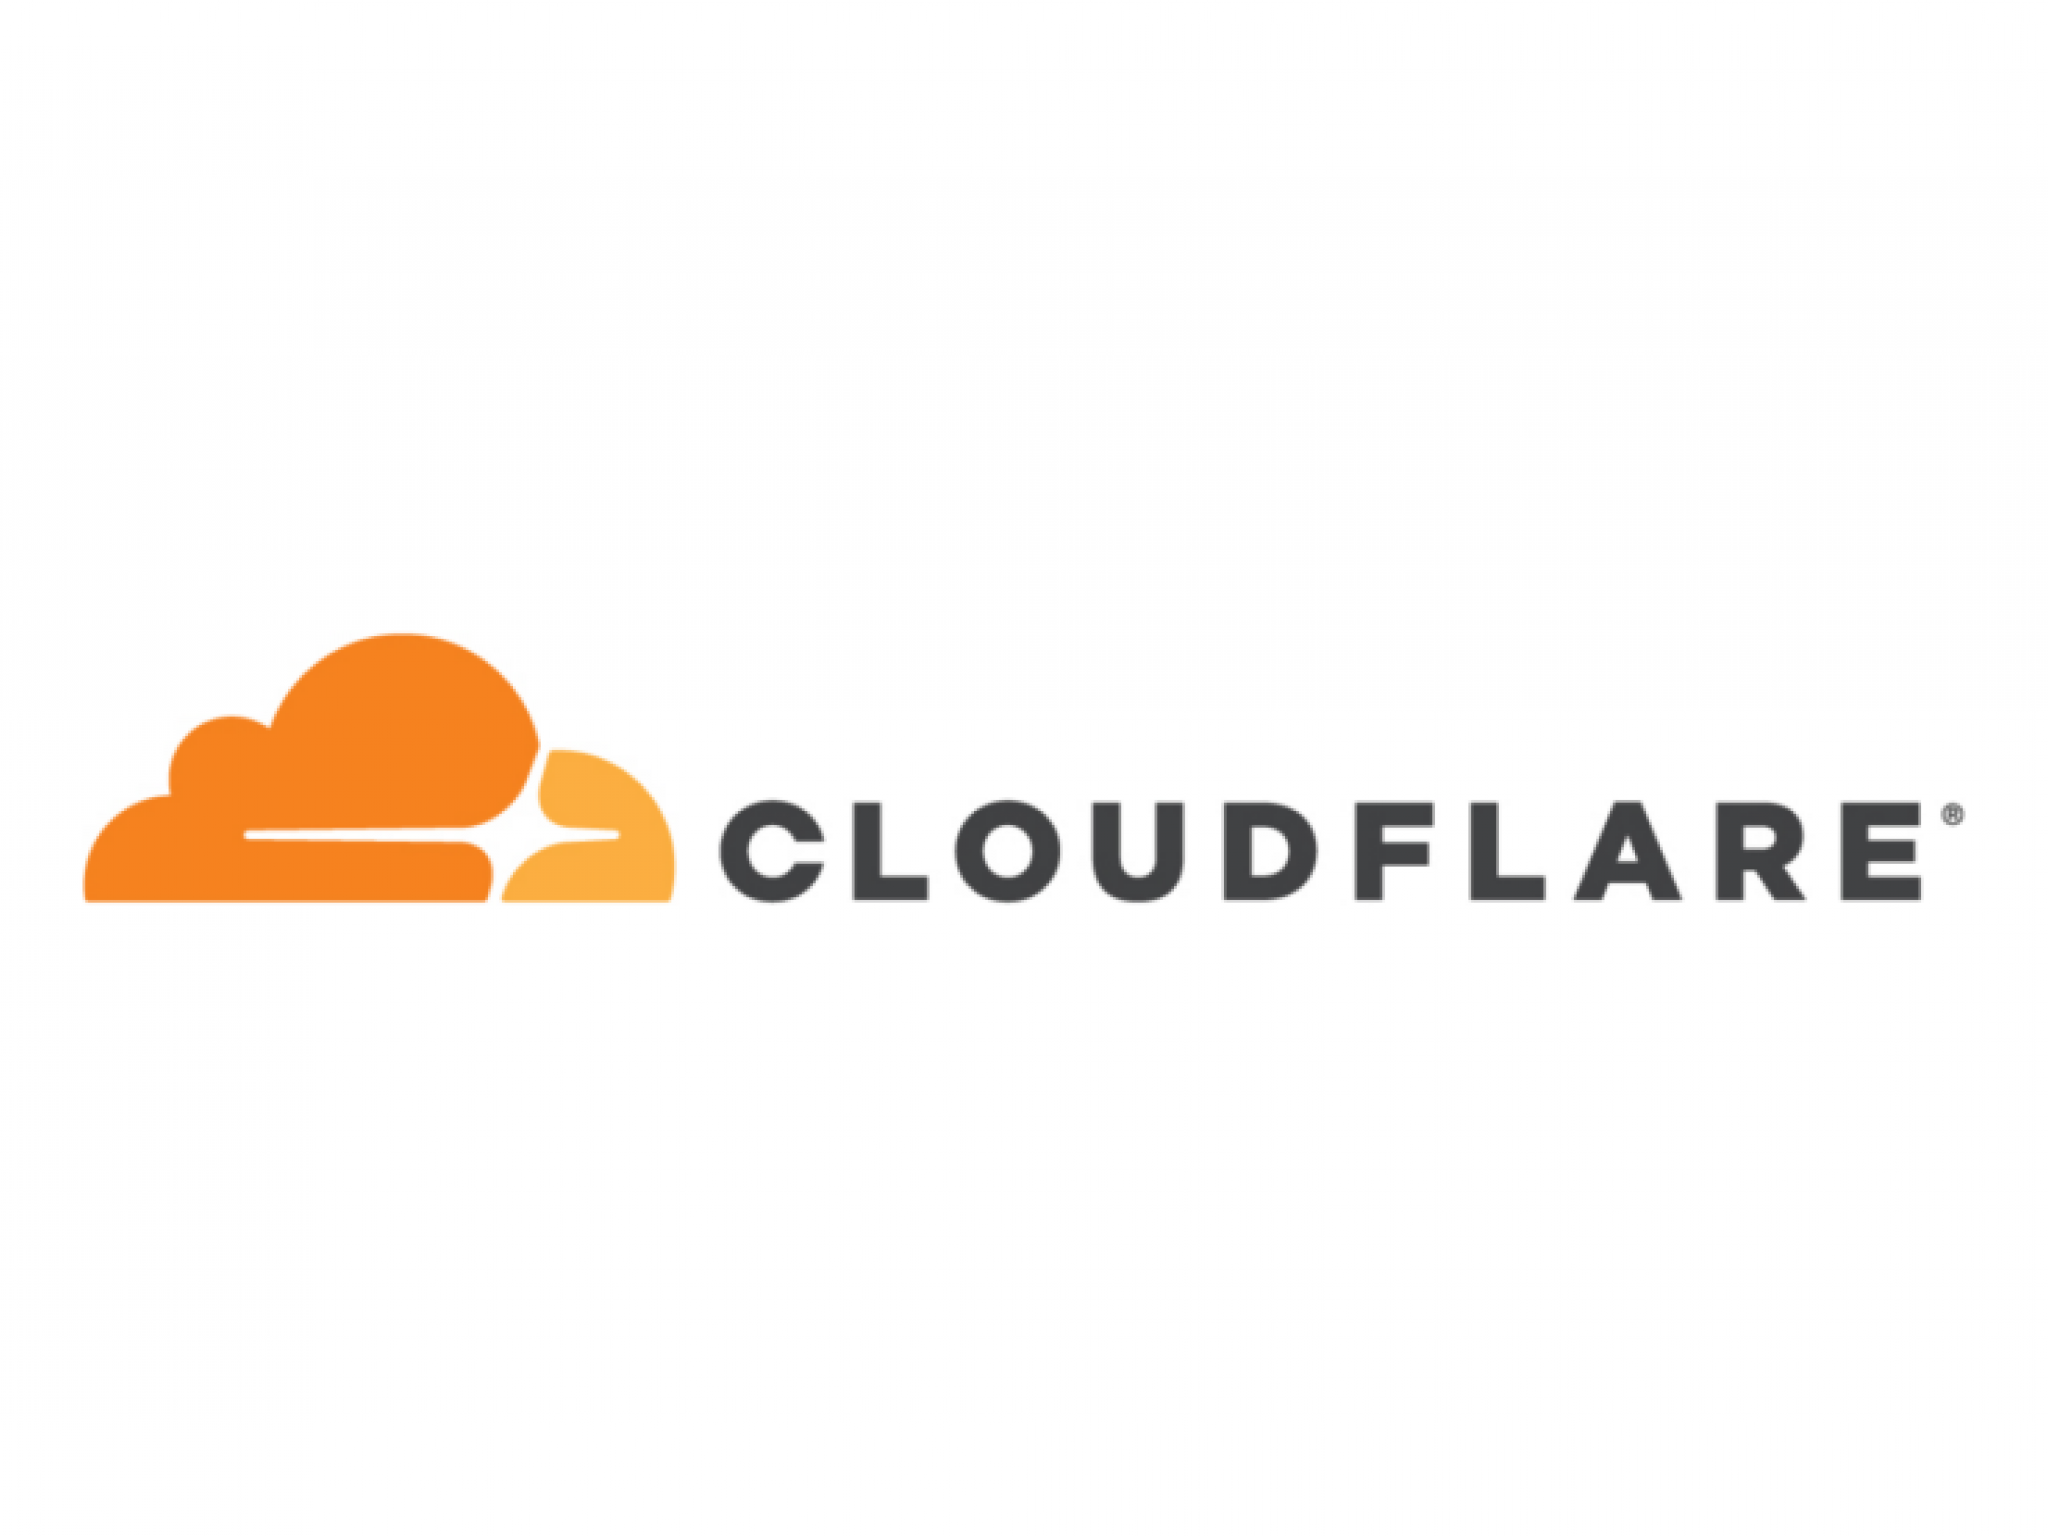  why-cloudflare-shares-are-rising-today 